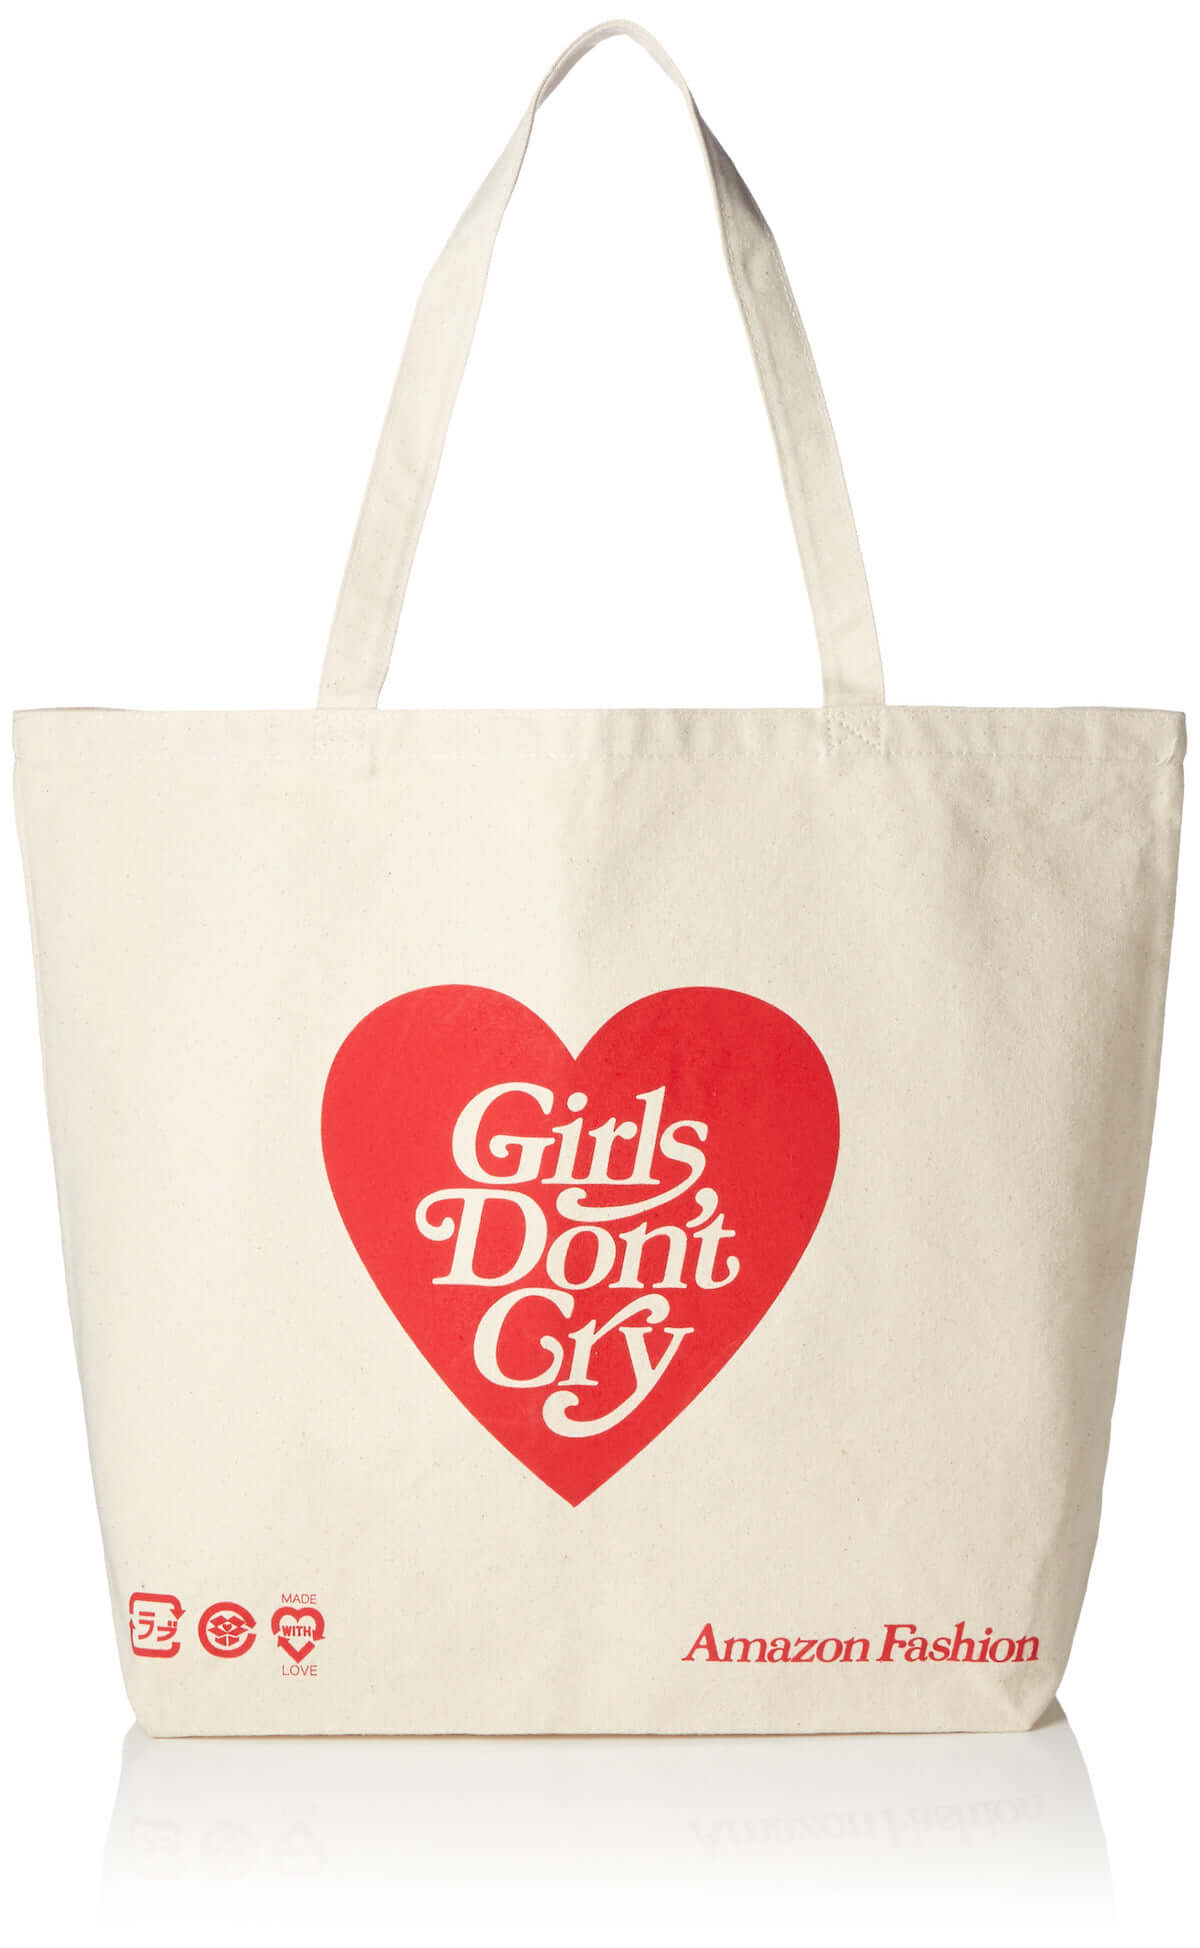 Amazon Fashion “AT TOKYO” BRAND STOREにて、Girls Don't Cry 